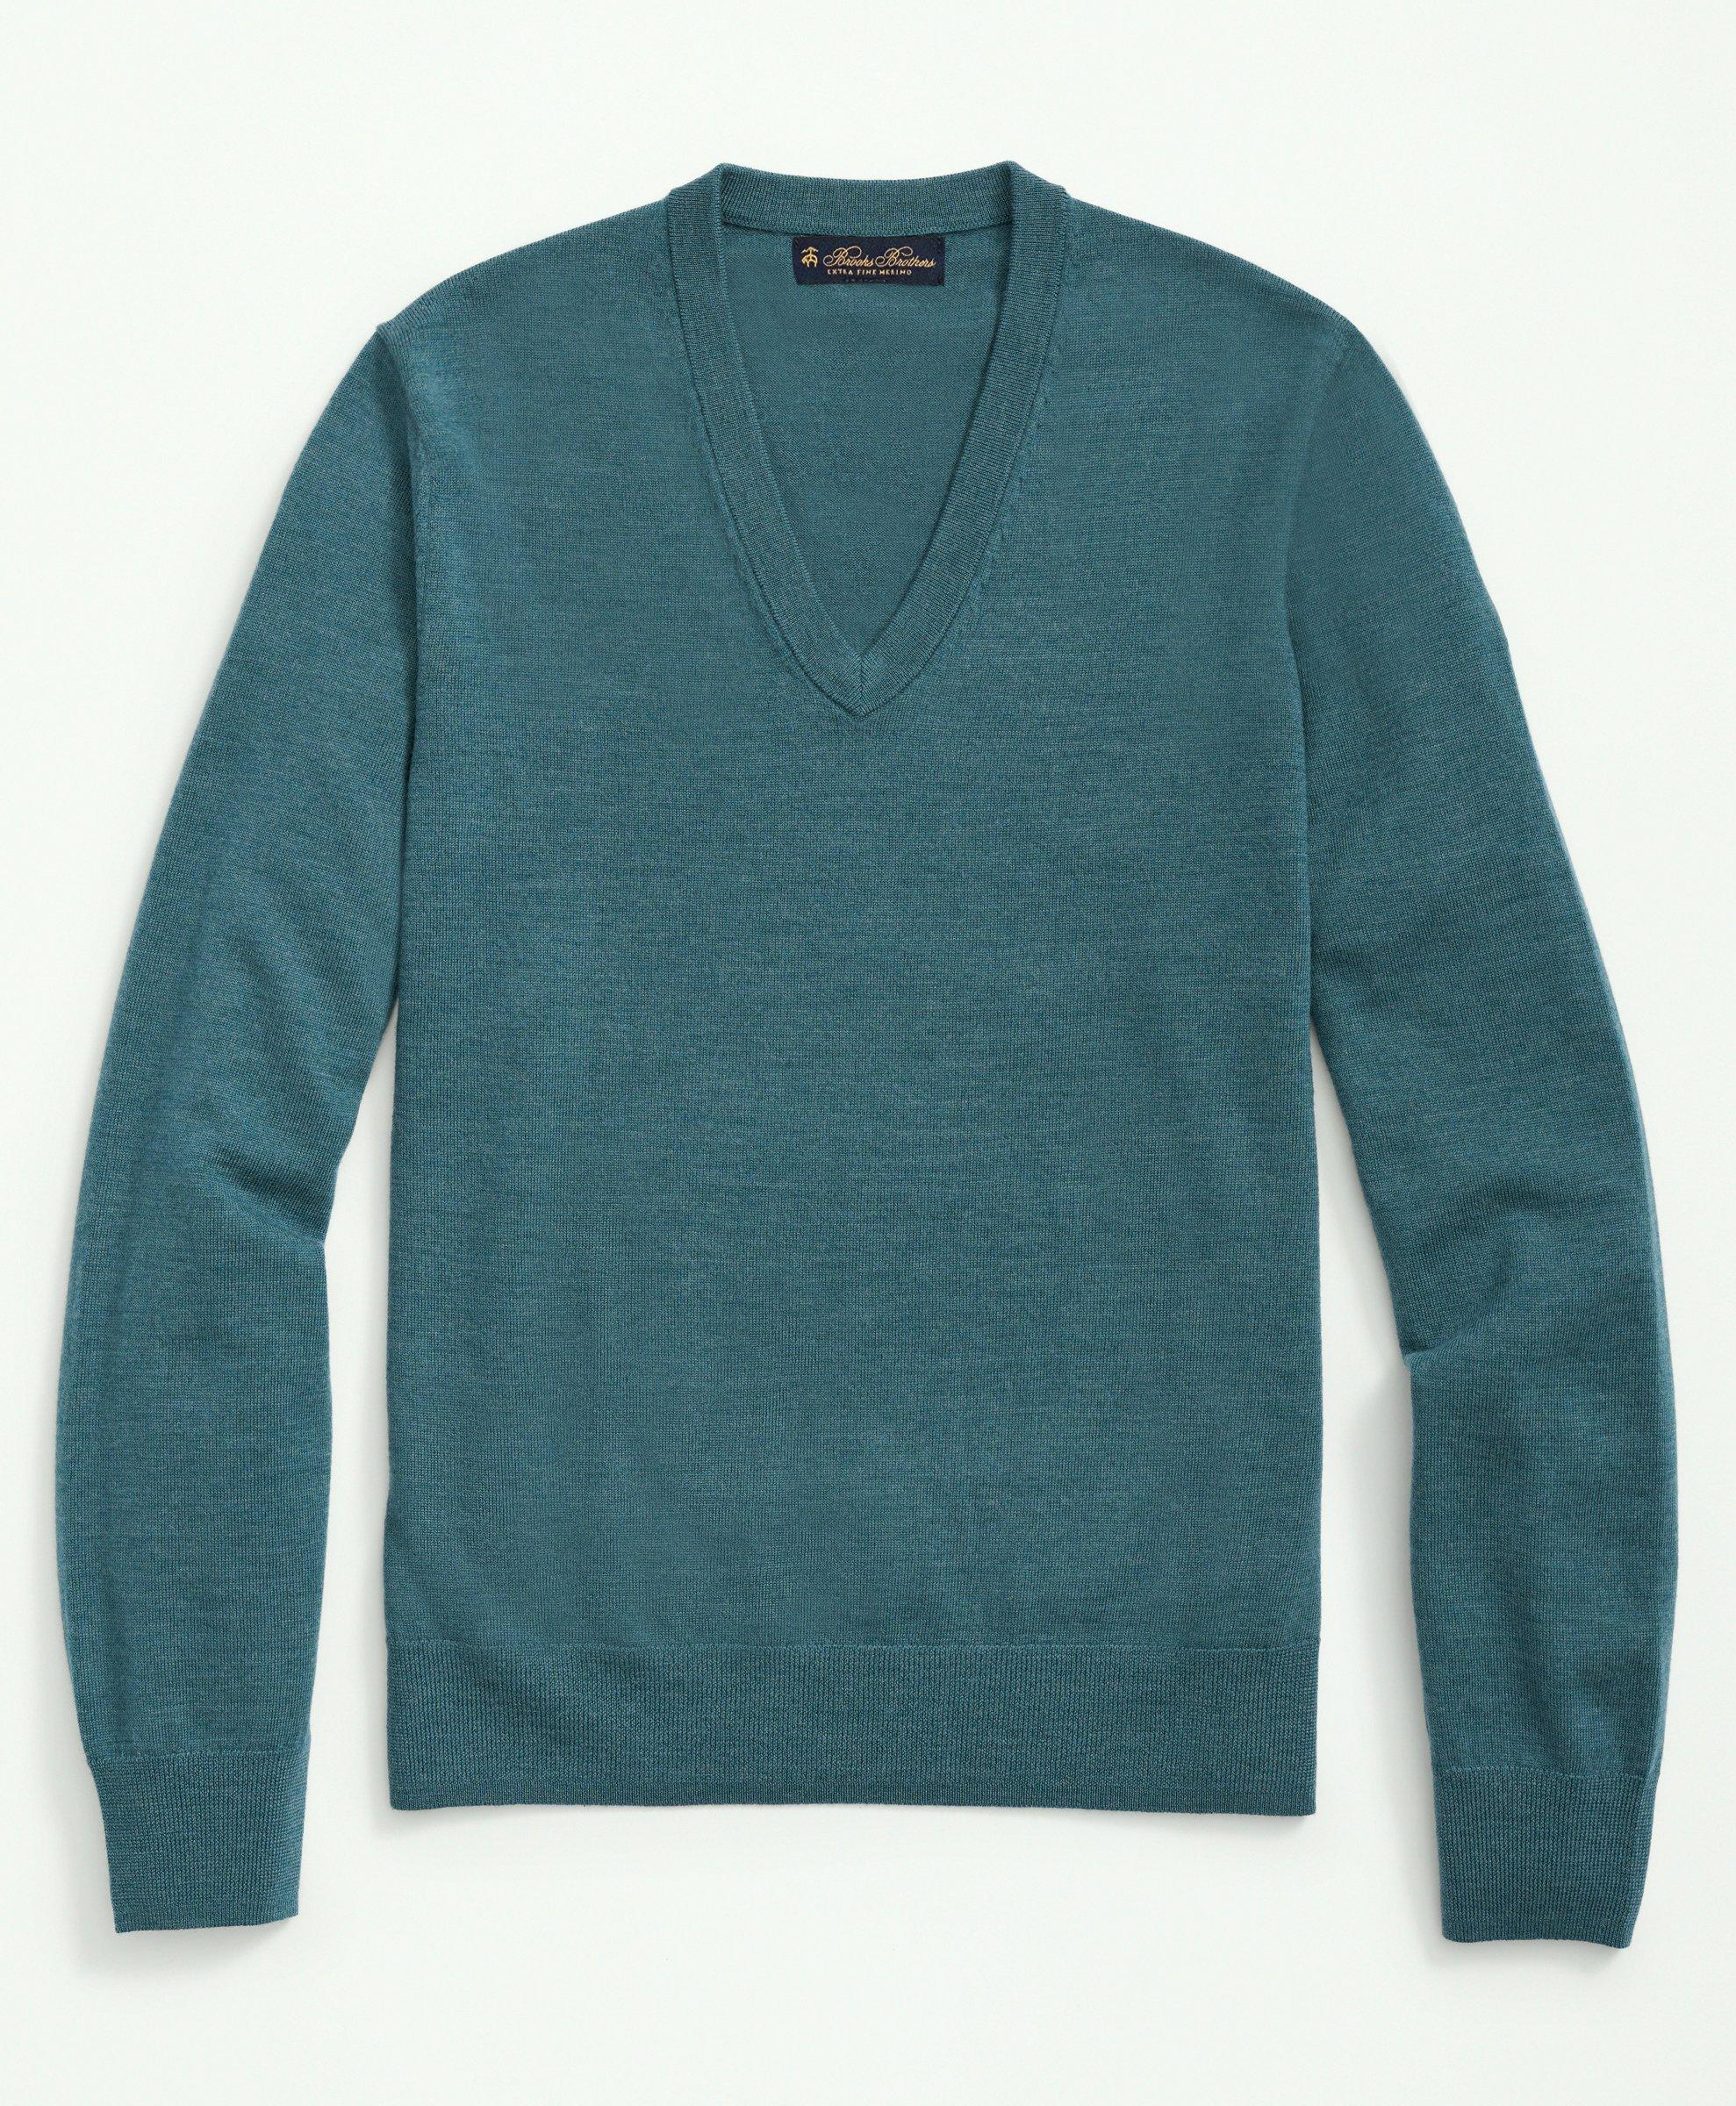 Brooks Brothers Fine Merino Wool V-neck Sweater | Teal | Size 2xl